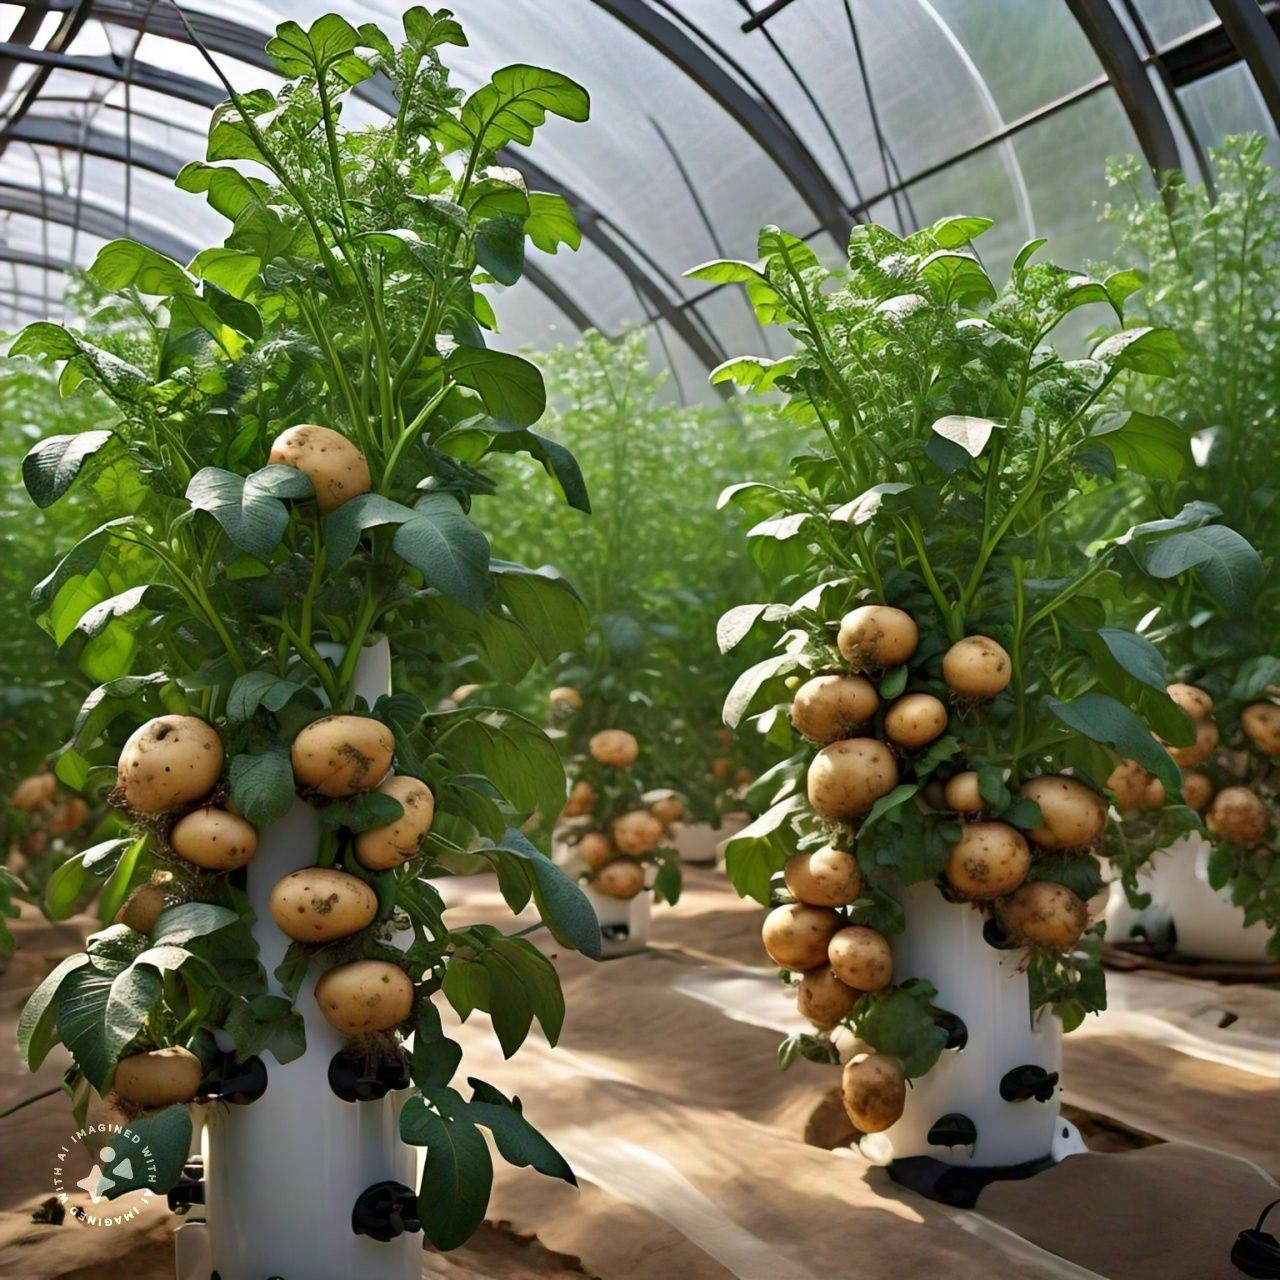 Growing Potatoes in Air: A Revolutionary Approach to Potato Farming